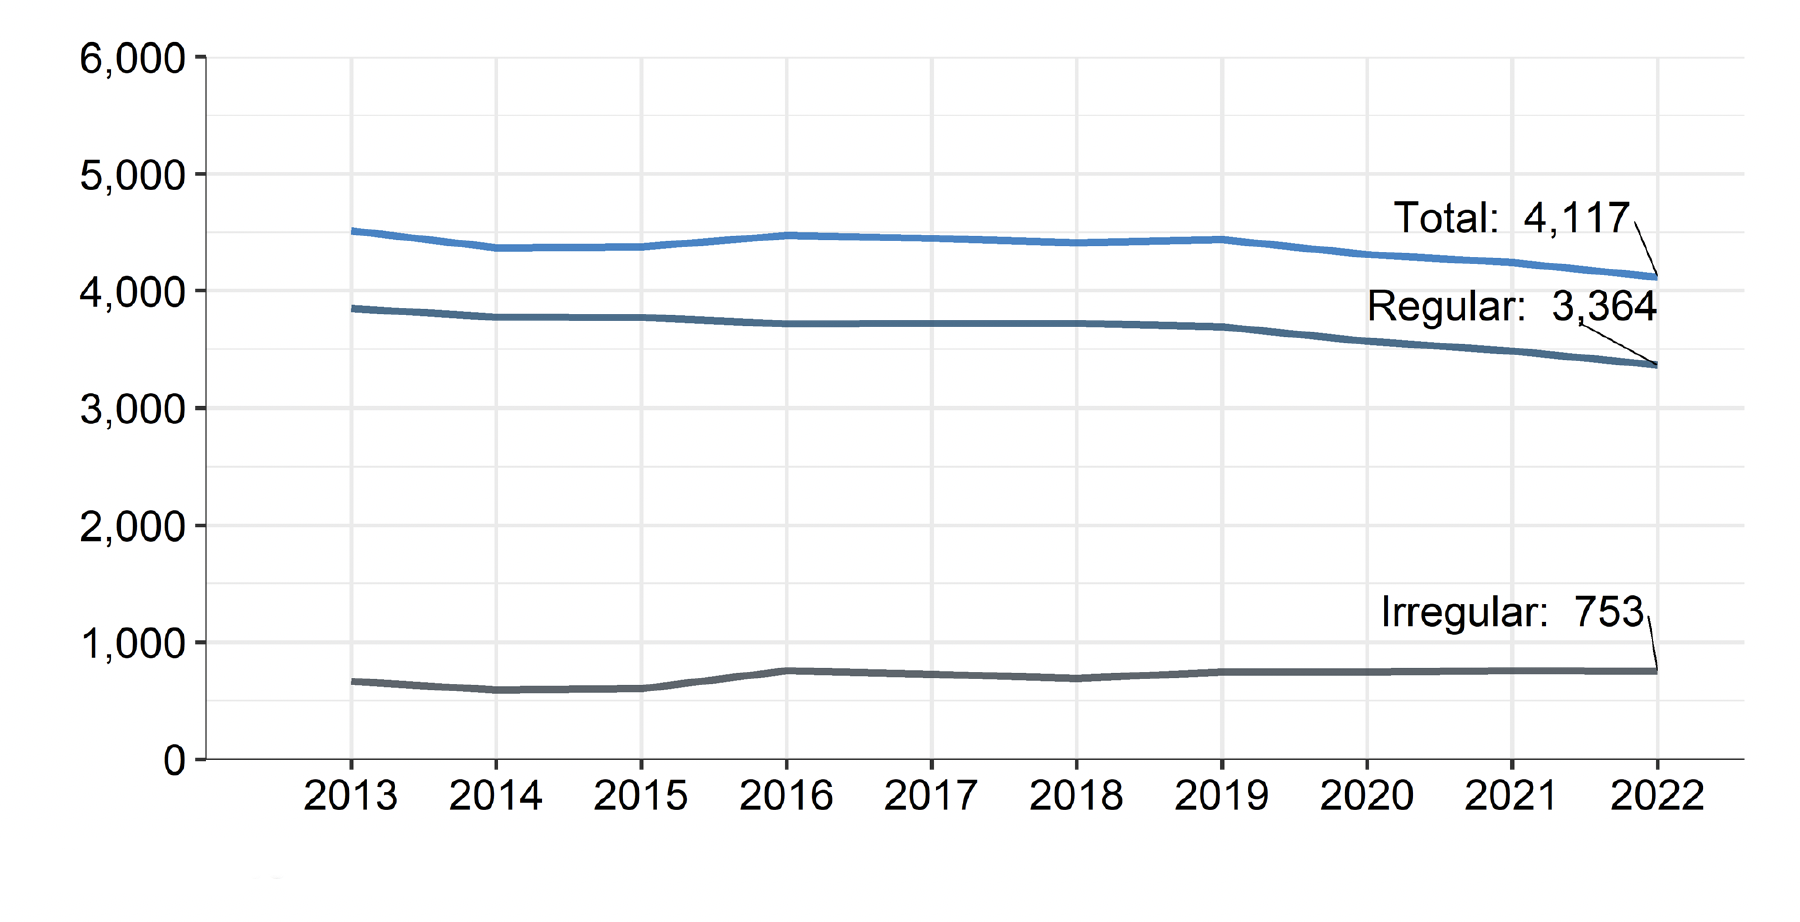 A graph showing the trends in the number of fishers working on Scottish vessels from 2013 to 2022. The graph shows that the number of regular fishers are decreasing over time with the number of irregular fishers increasing. 